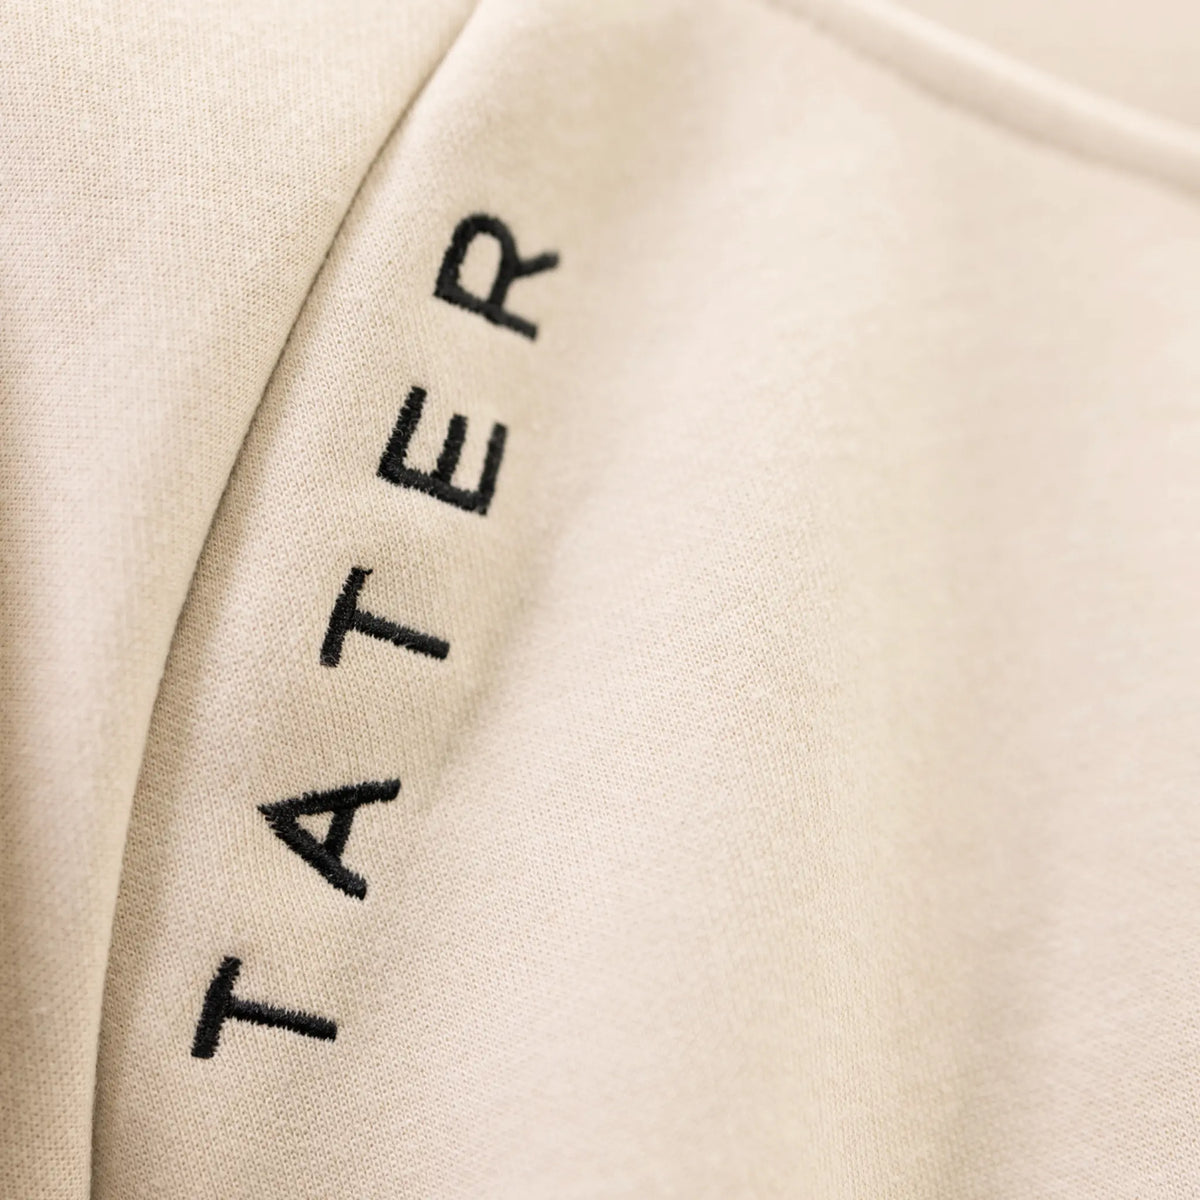 The image shows a close-up of a Tater Baseball branded workout hoodie in a cream color. The TATER logo is embroidered in black, emphasizing the premium material of the apparel.